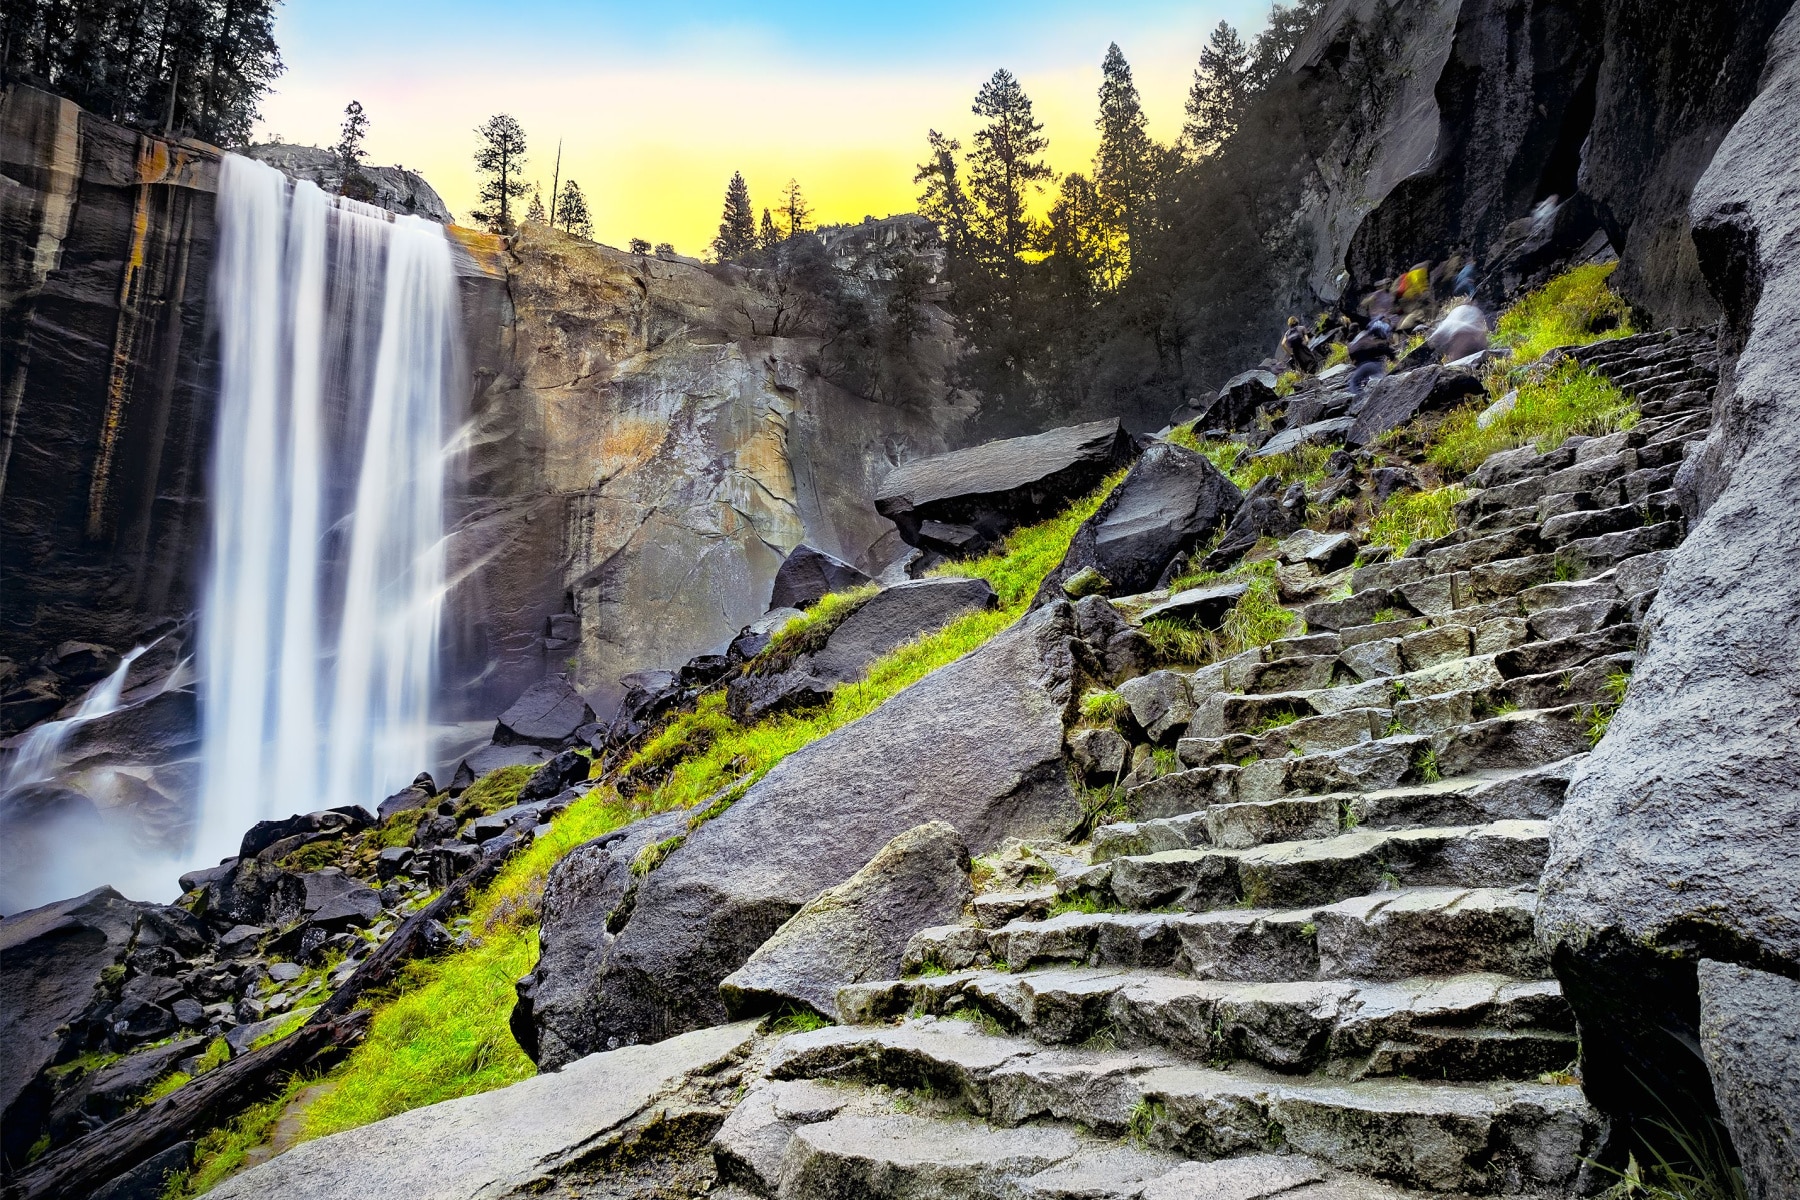 The view of Vernal Falls from a stone staircase in Yosemite National Park, one of the best national parks to visit in April.